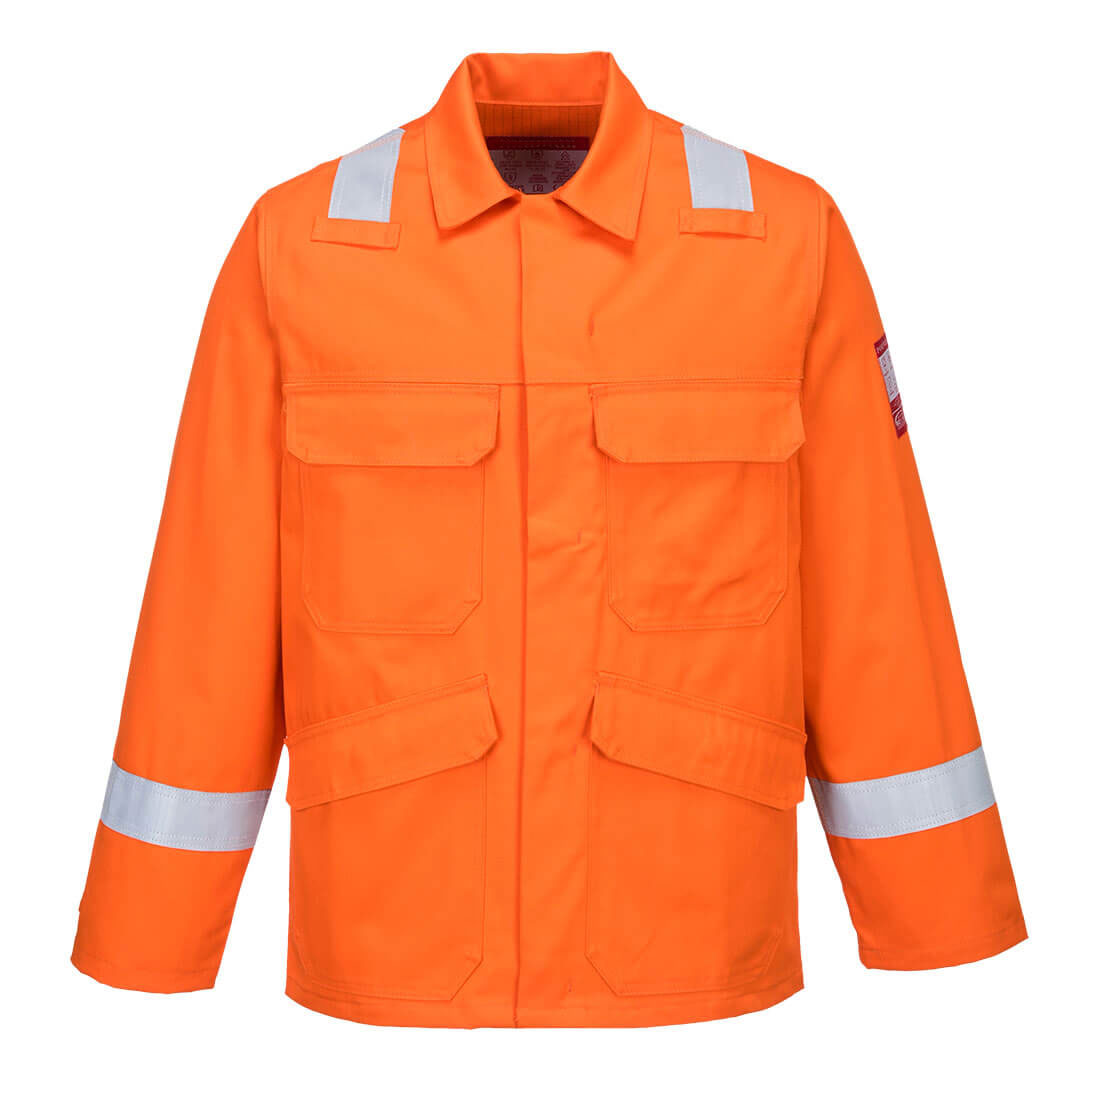  Flame Resistant Outdoor Durable Classic Jacket with Against Welding Hazards 